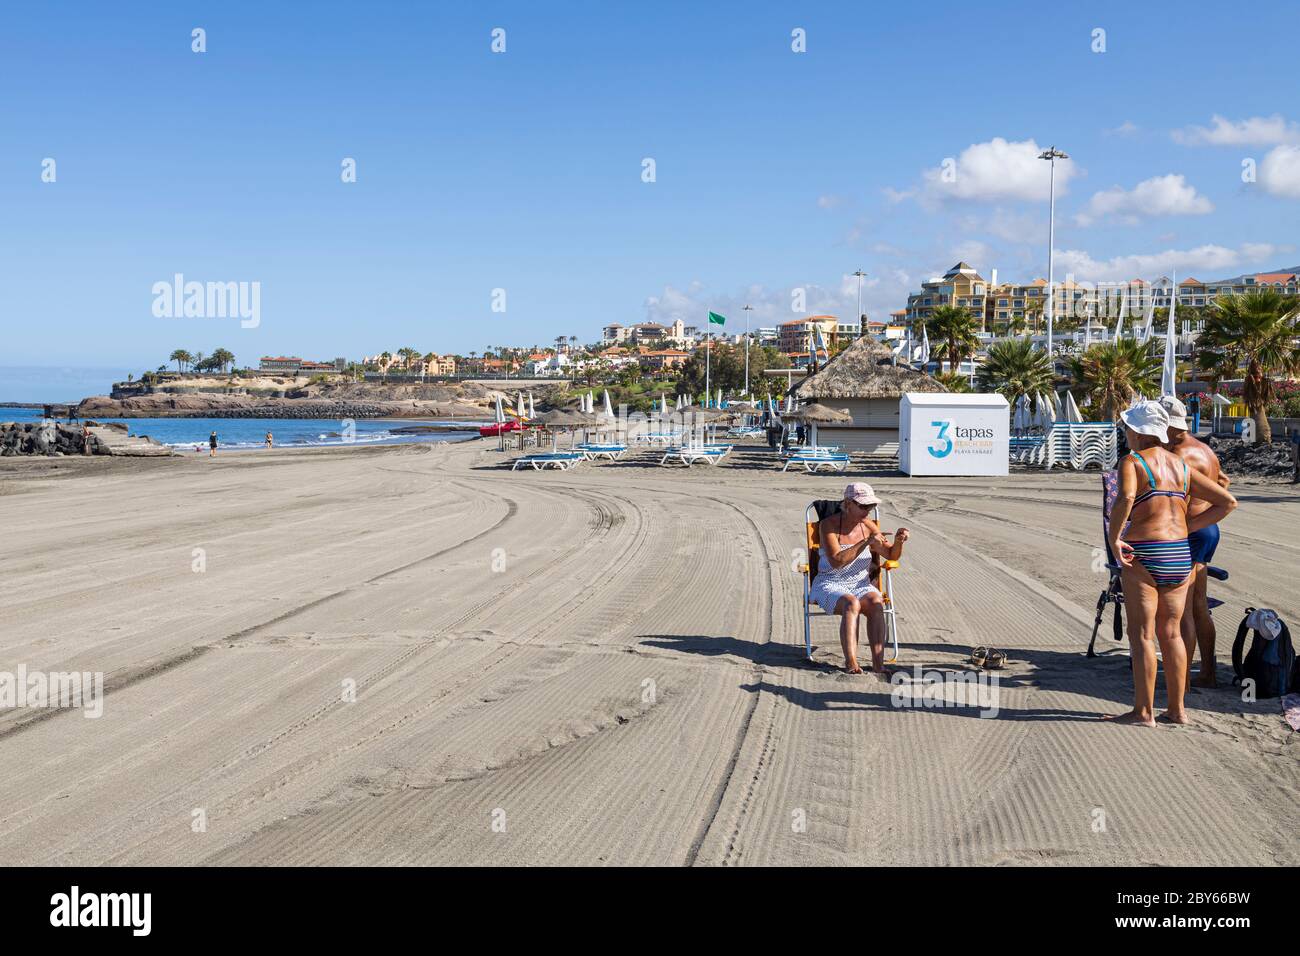 Costa Adeje, Tenerife, Canary Islands, Spain. 9 June 2020. Locals enjoying the open beaches. Usually packed with tourists now only residents are on the island due to Covid 19, Corona virus state of Emergency, now in Phase 3 of de-escalation and hopefully ready to accept international tourism from 1st July. Stock Photo